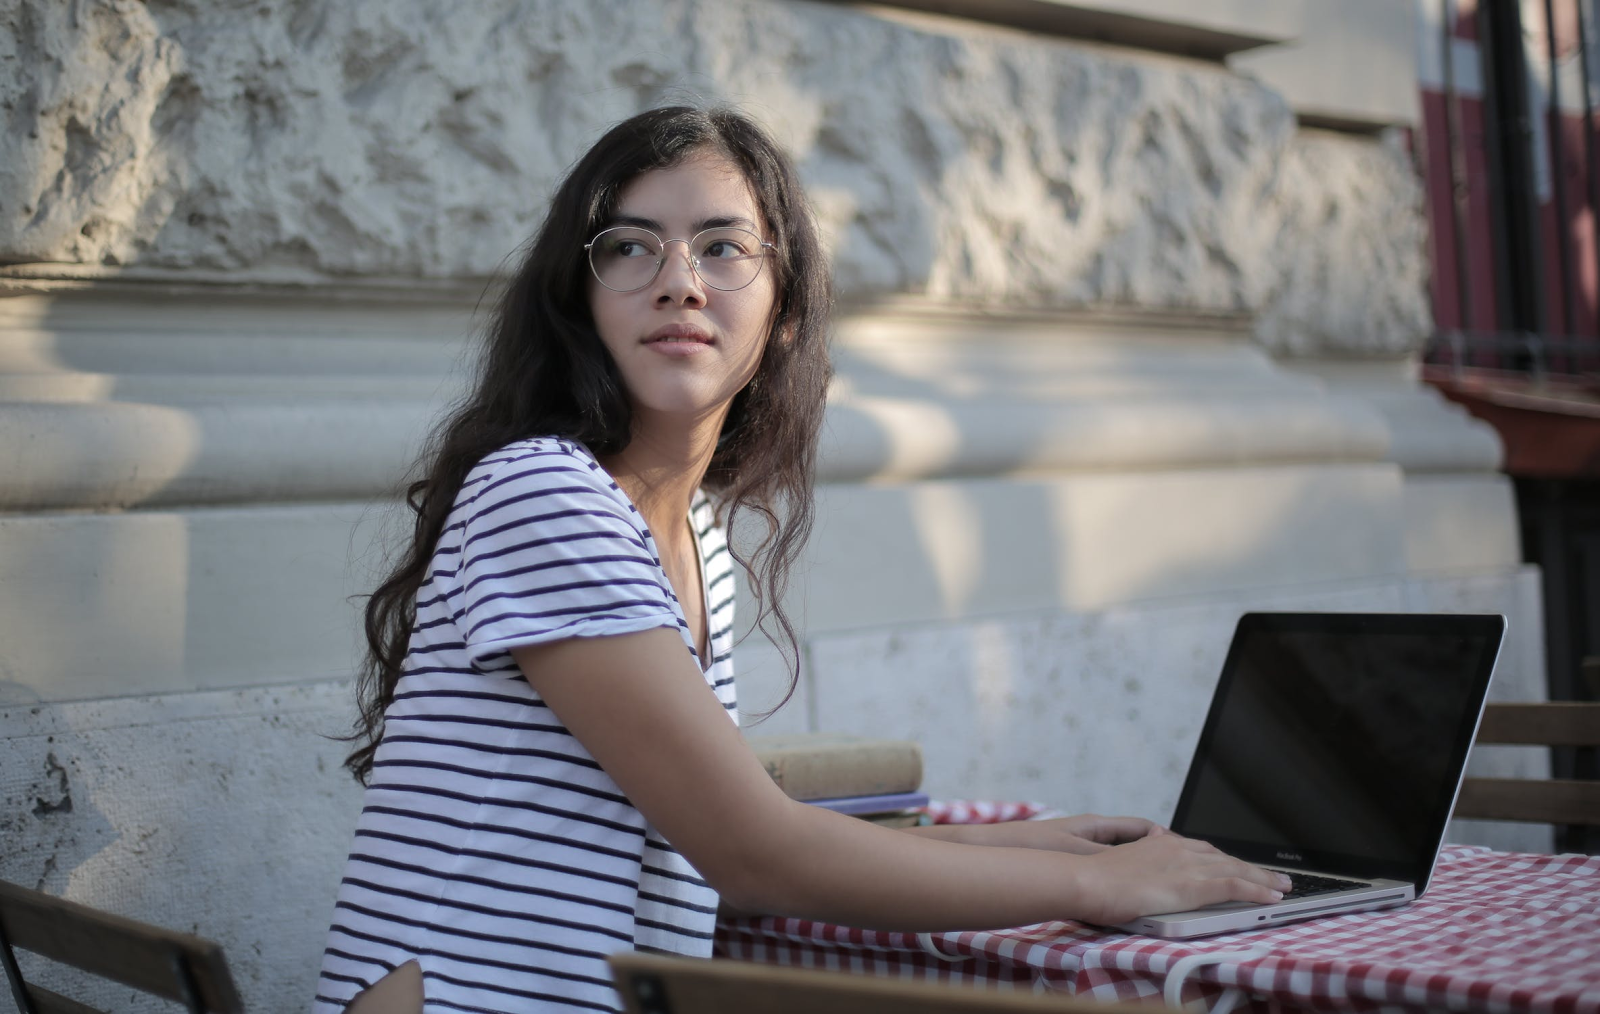 Woman in a striped t-shirt sitting at an outside table with her laptop, looking behind her